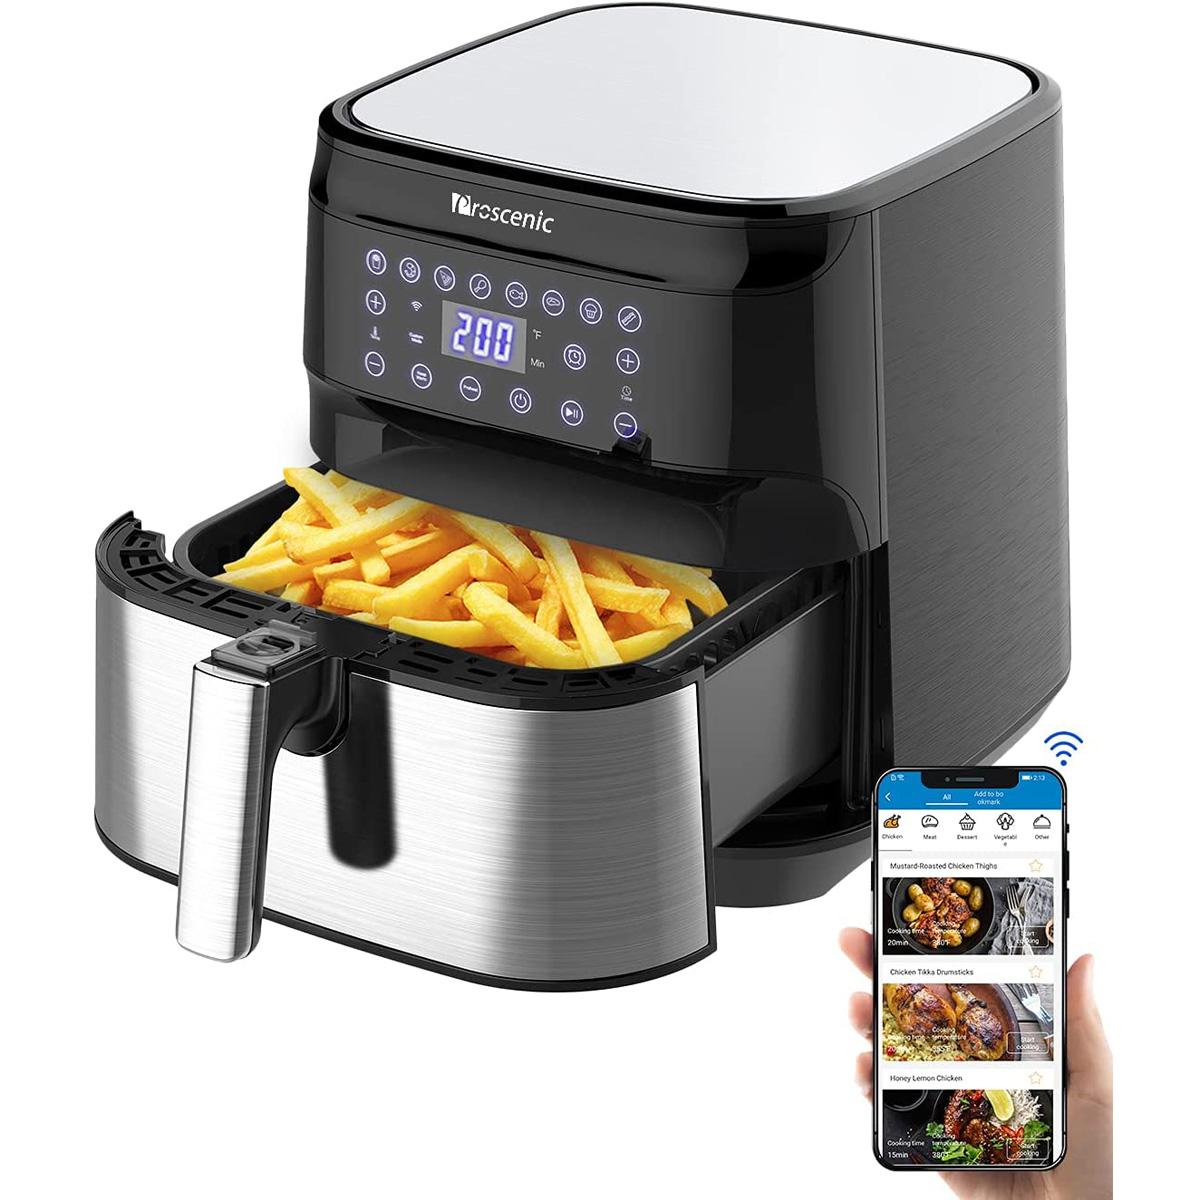 Proscenic T21 Smart WiFi Air Fryer for $86.40 Shipped